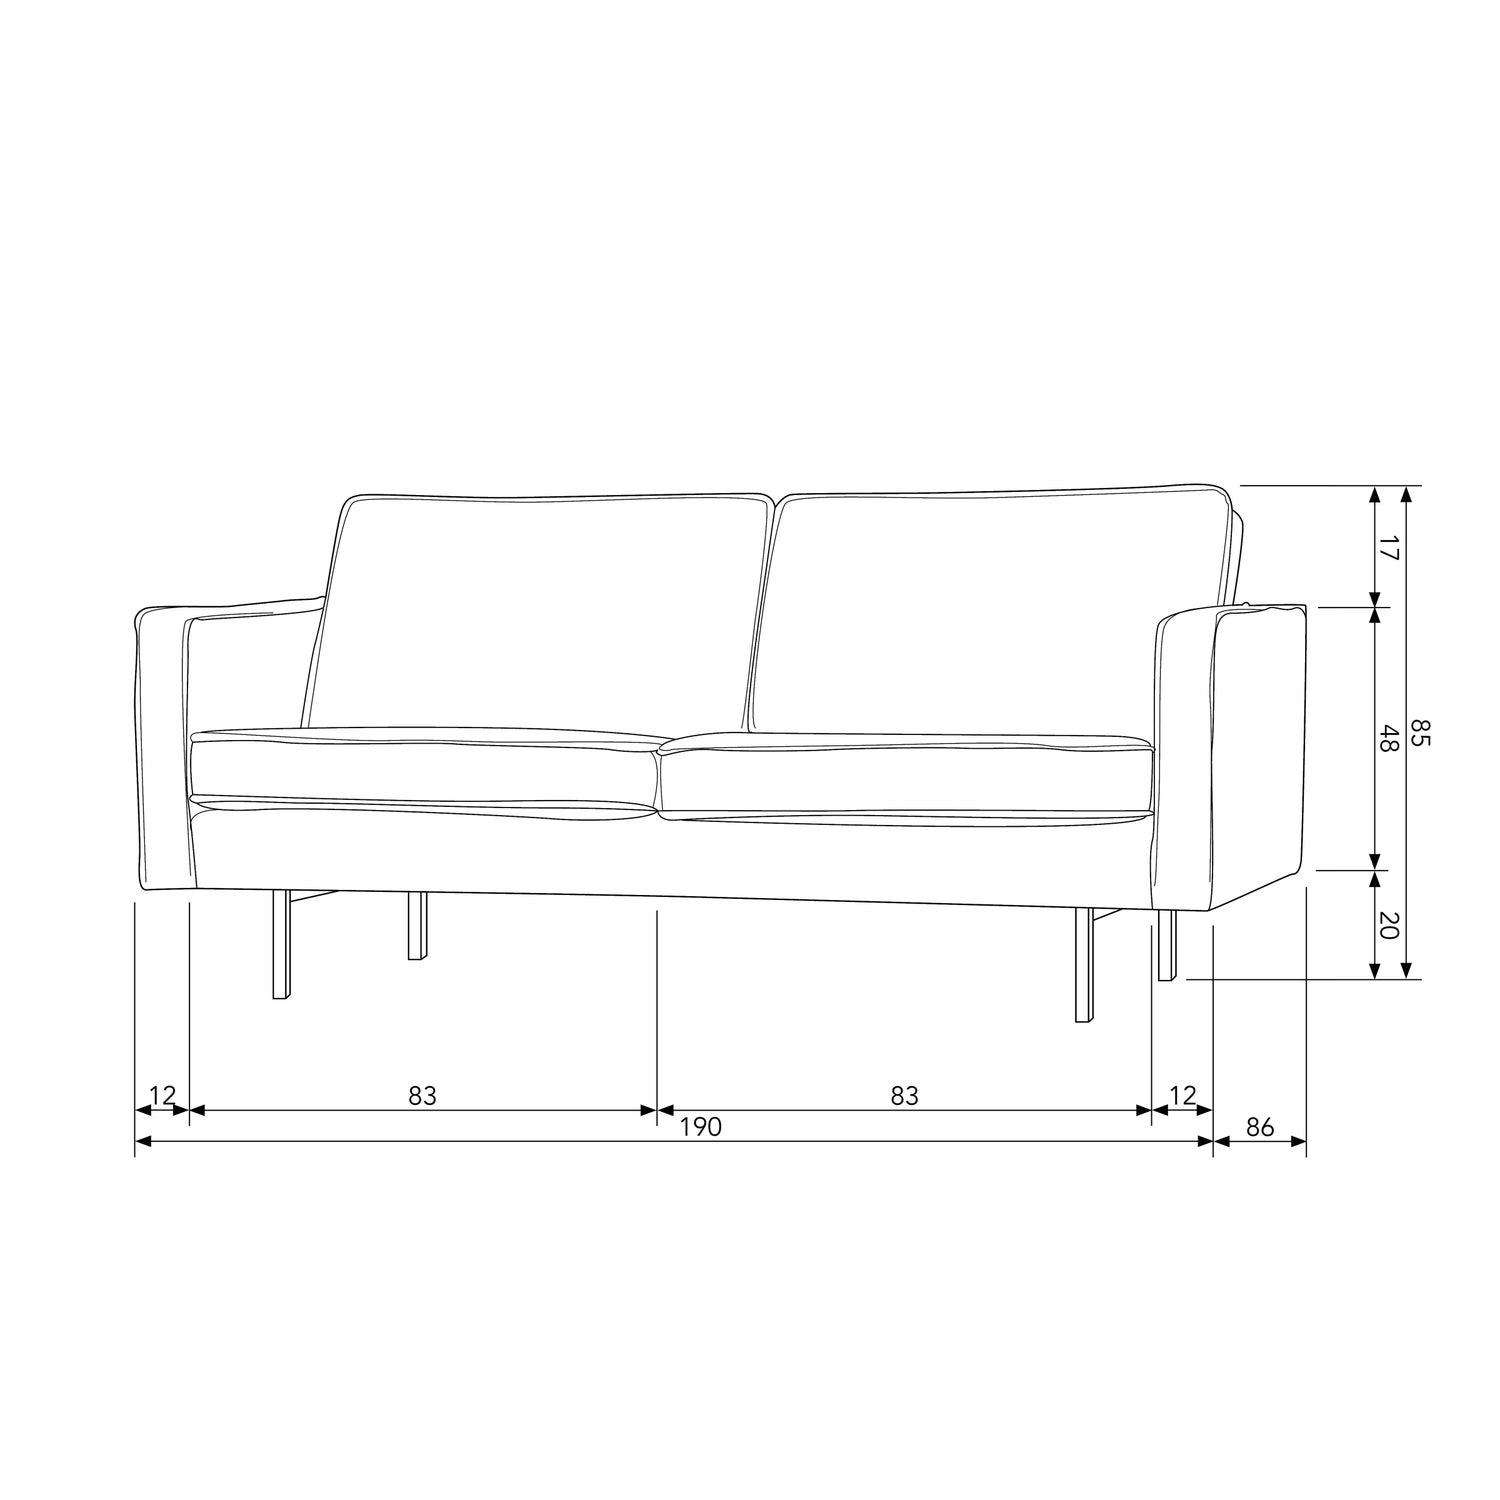 800542-NA-G-79-53-45-206-205-198-162-156-14-132-126-12-105-50_BT_Rodeo_25-seater_sofa.jpg?auto=webp&format=png&width=1500&height=1500